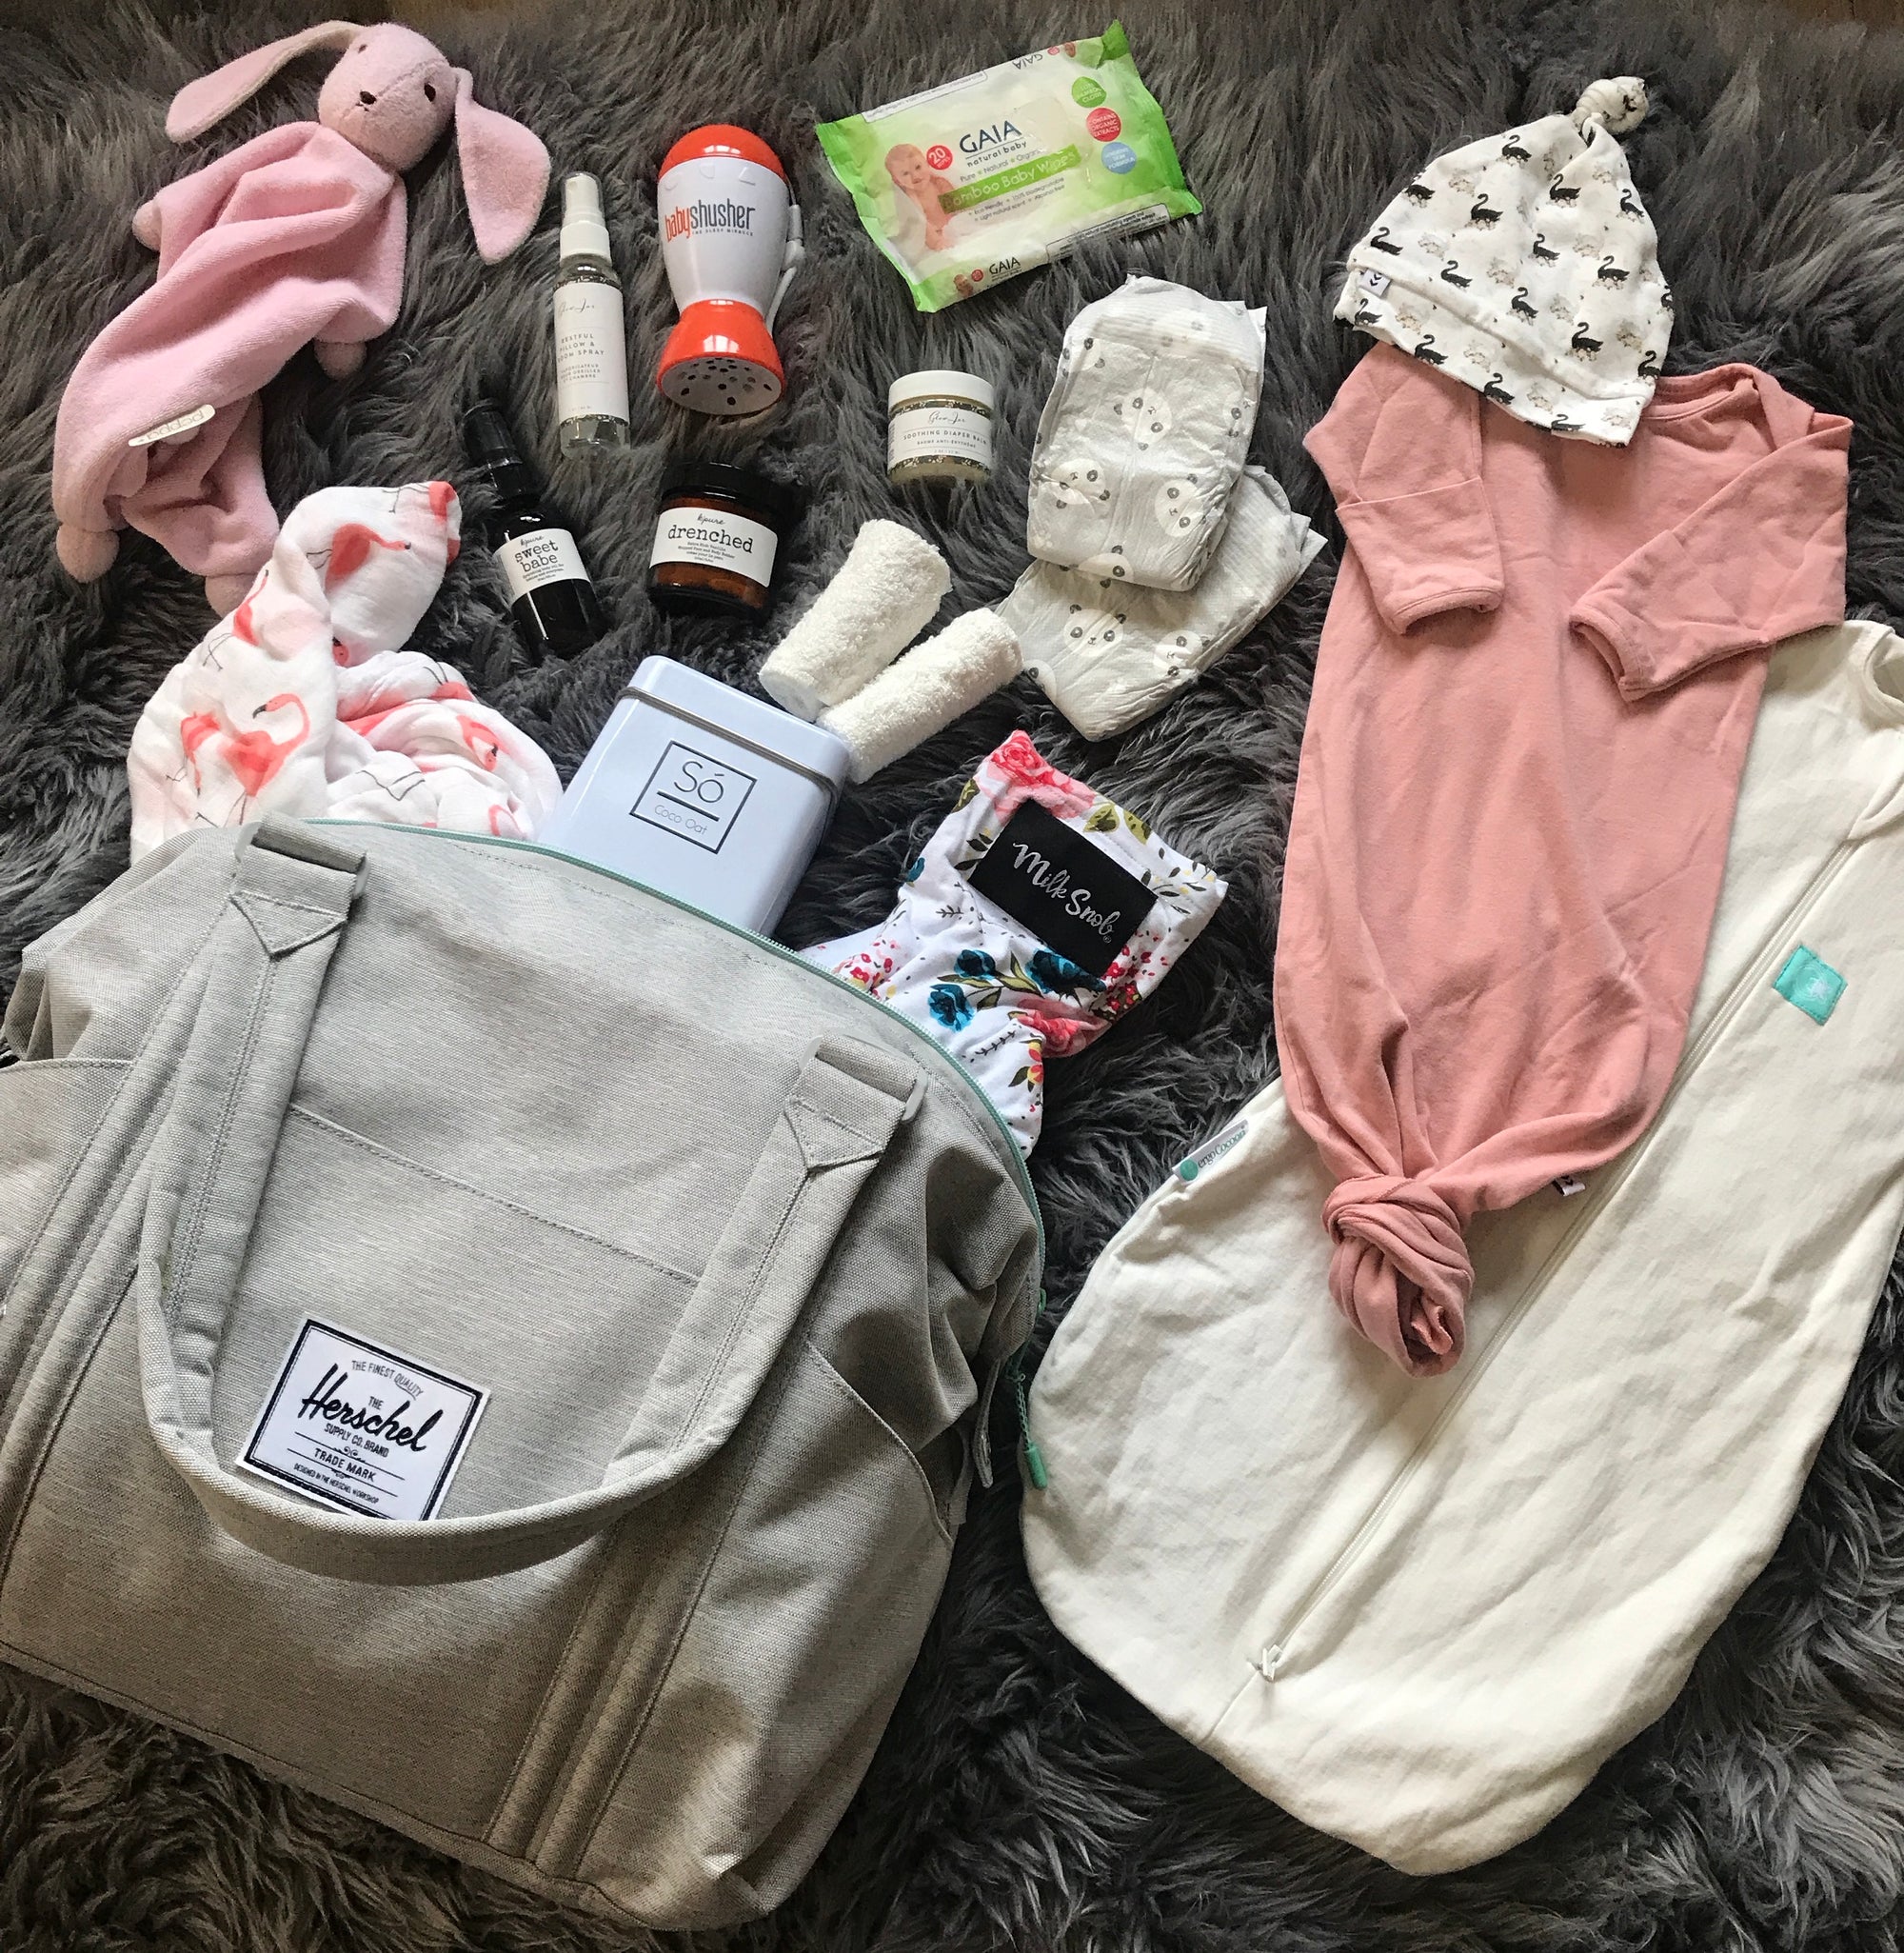 What's In My Hospital Bag for Baby #4